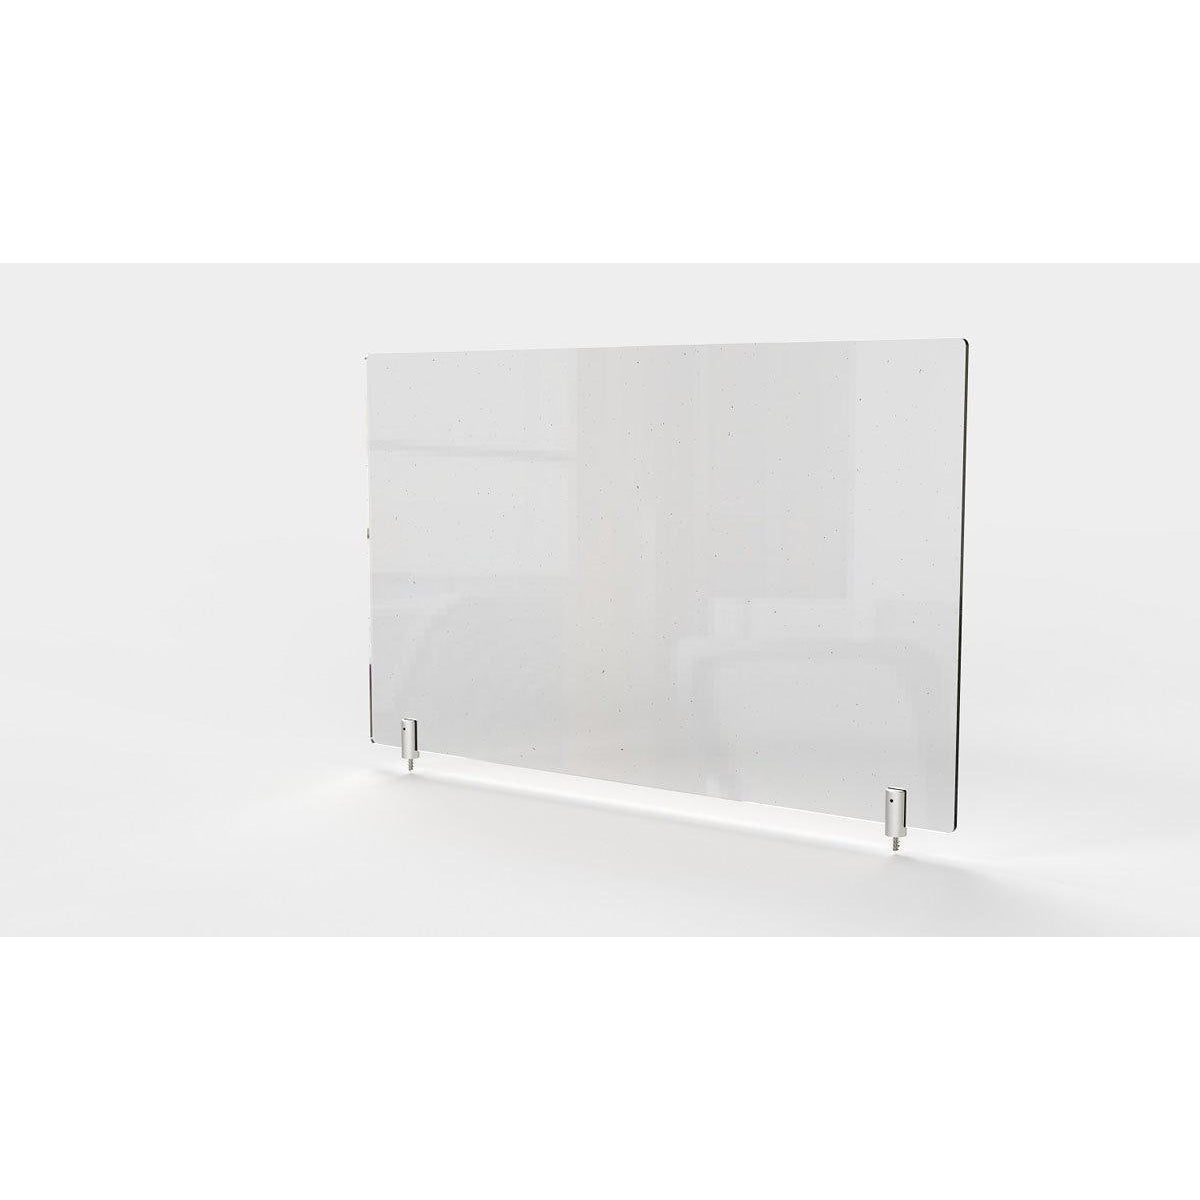 Clear Thermoplastic Partition & Cubicle Extender with Permanent Screw Attachment, 30"H x 29"W